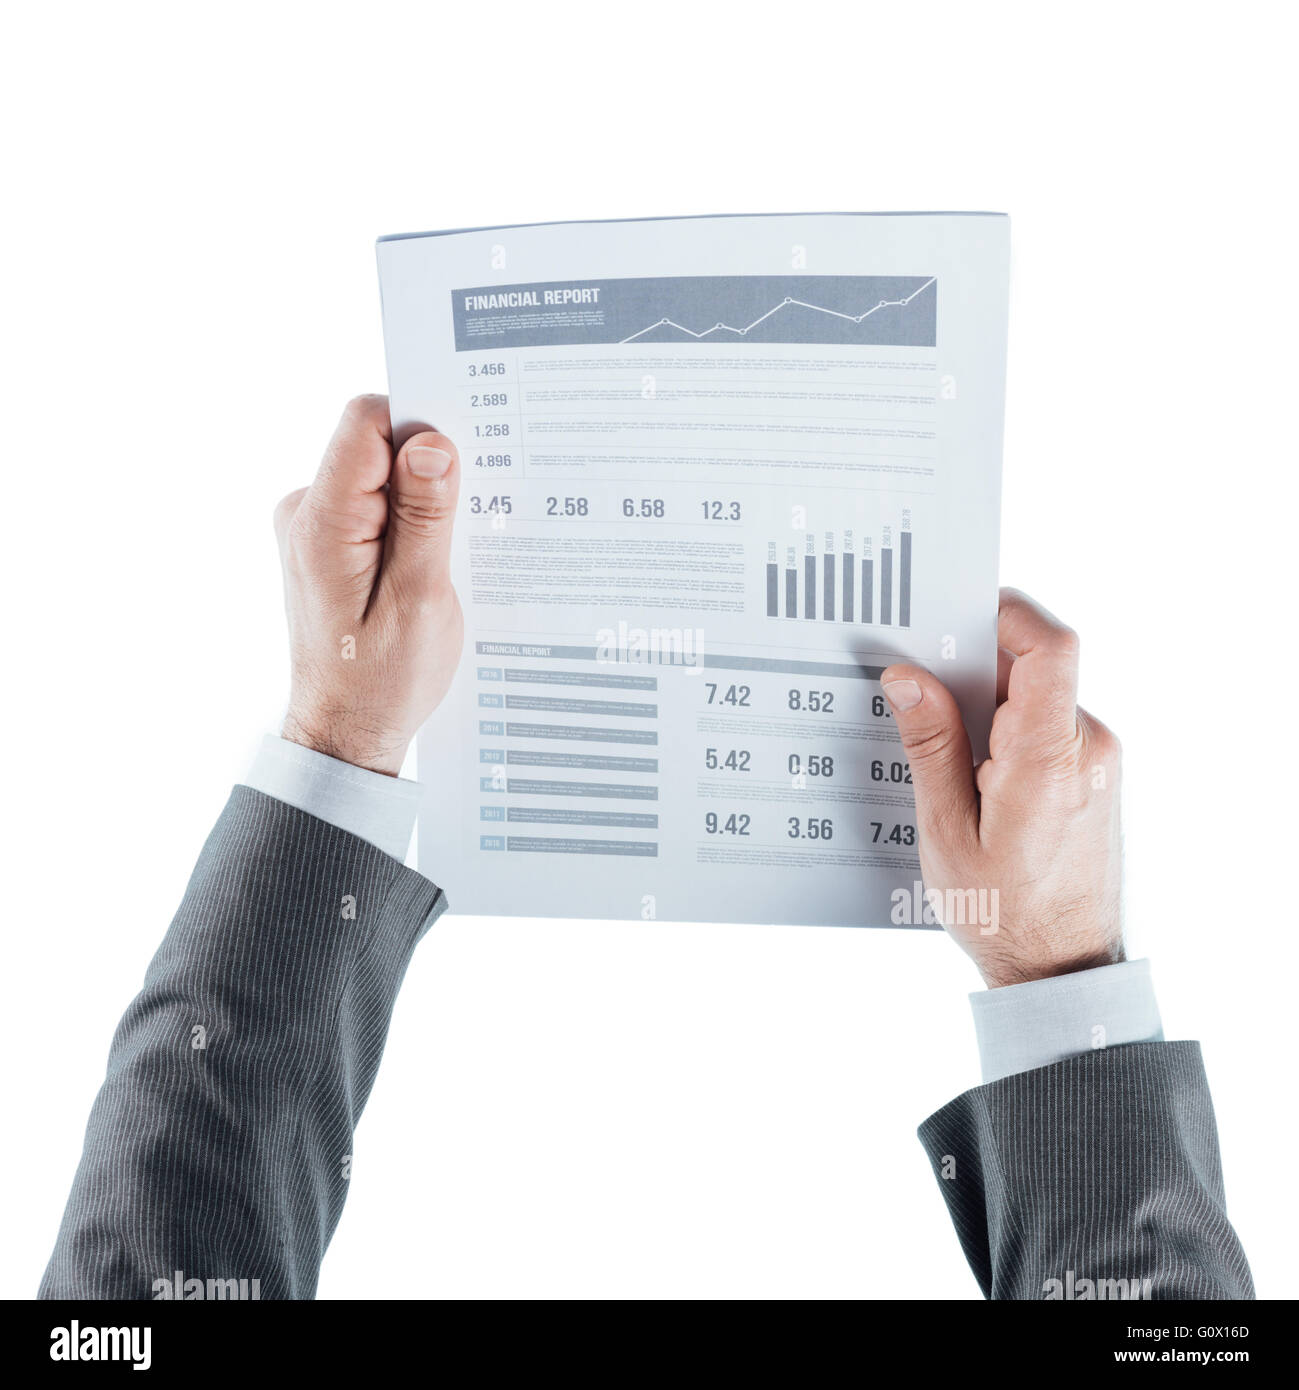 Businessman holding a financial report and checking data on white background, hands close up Stock Photo